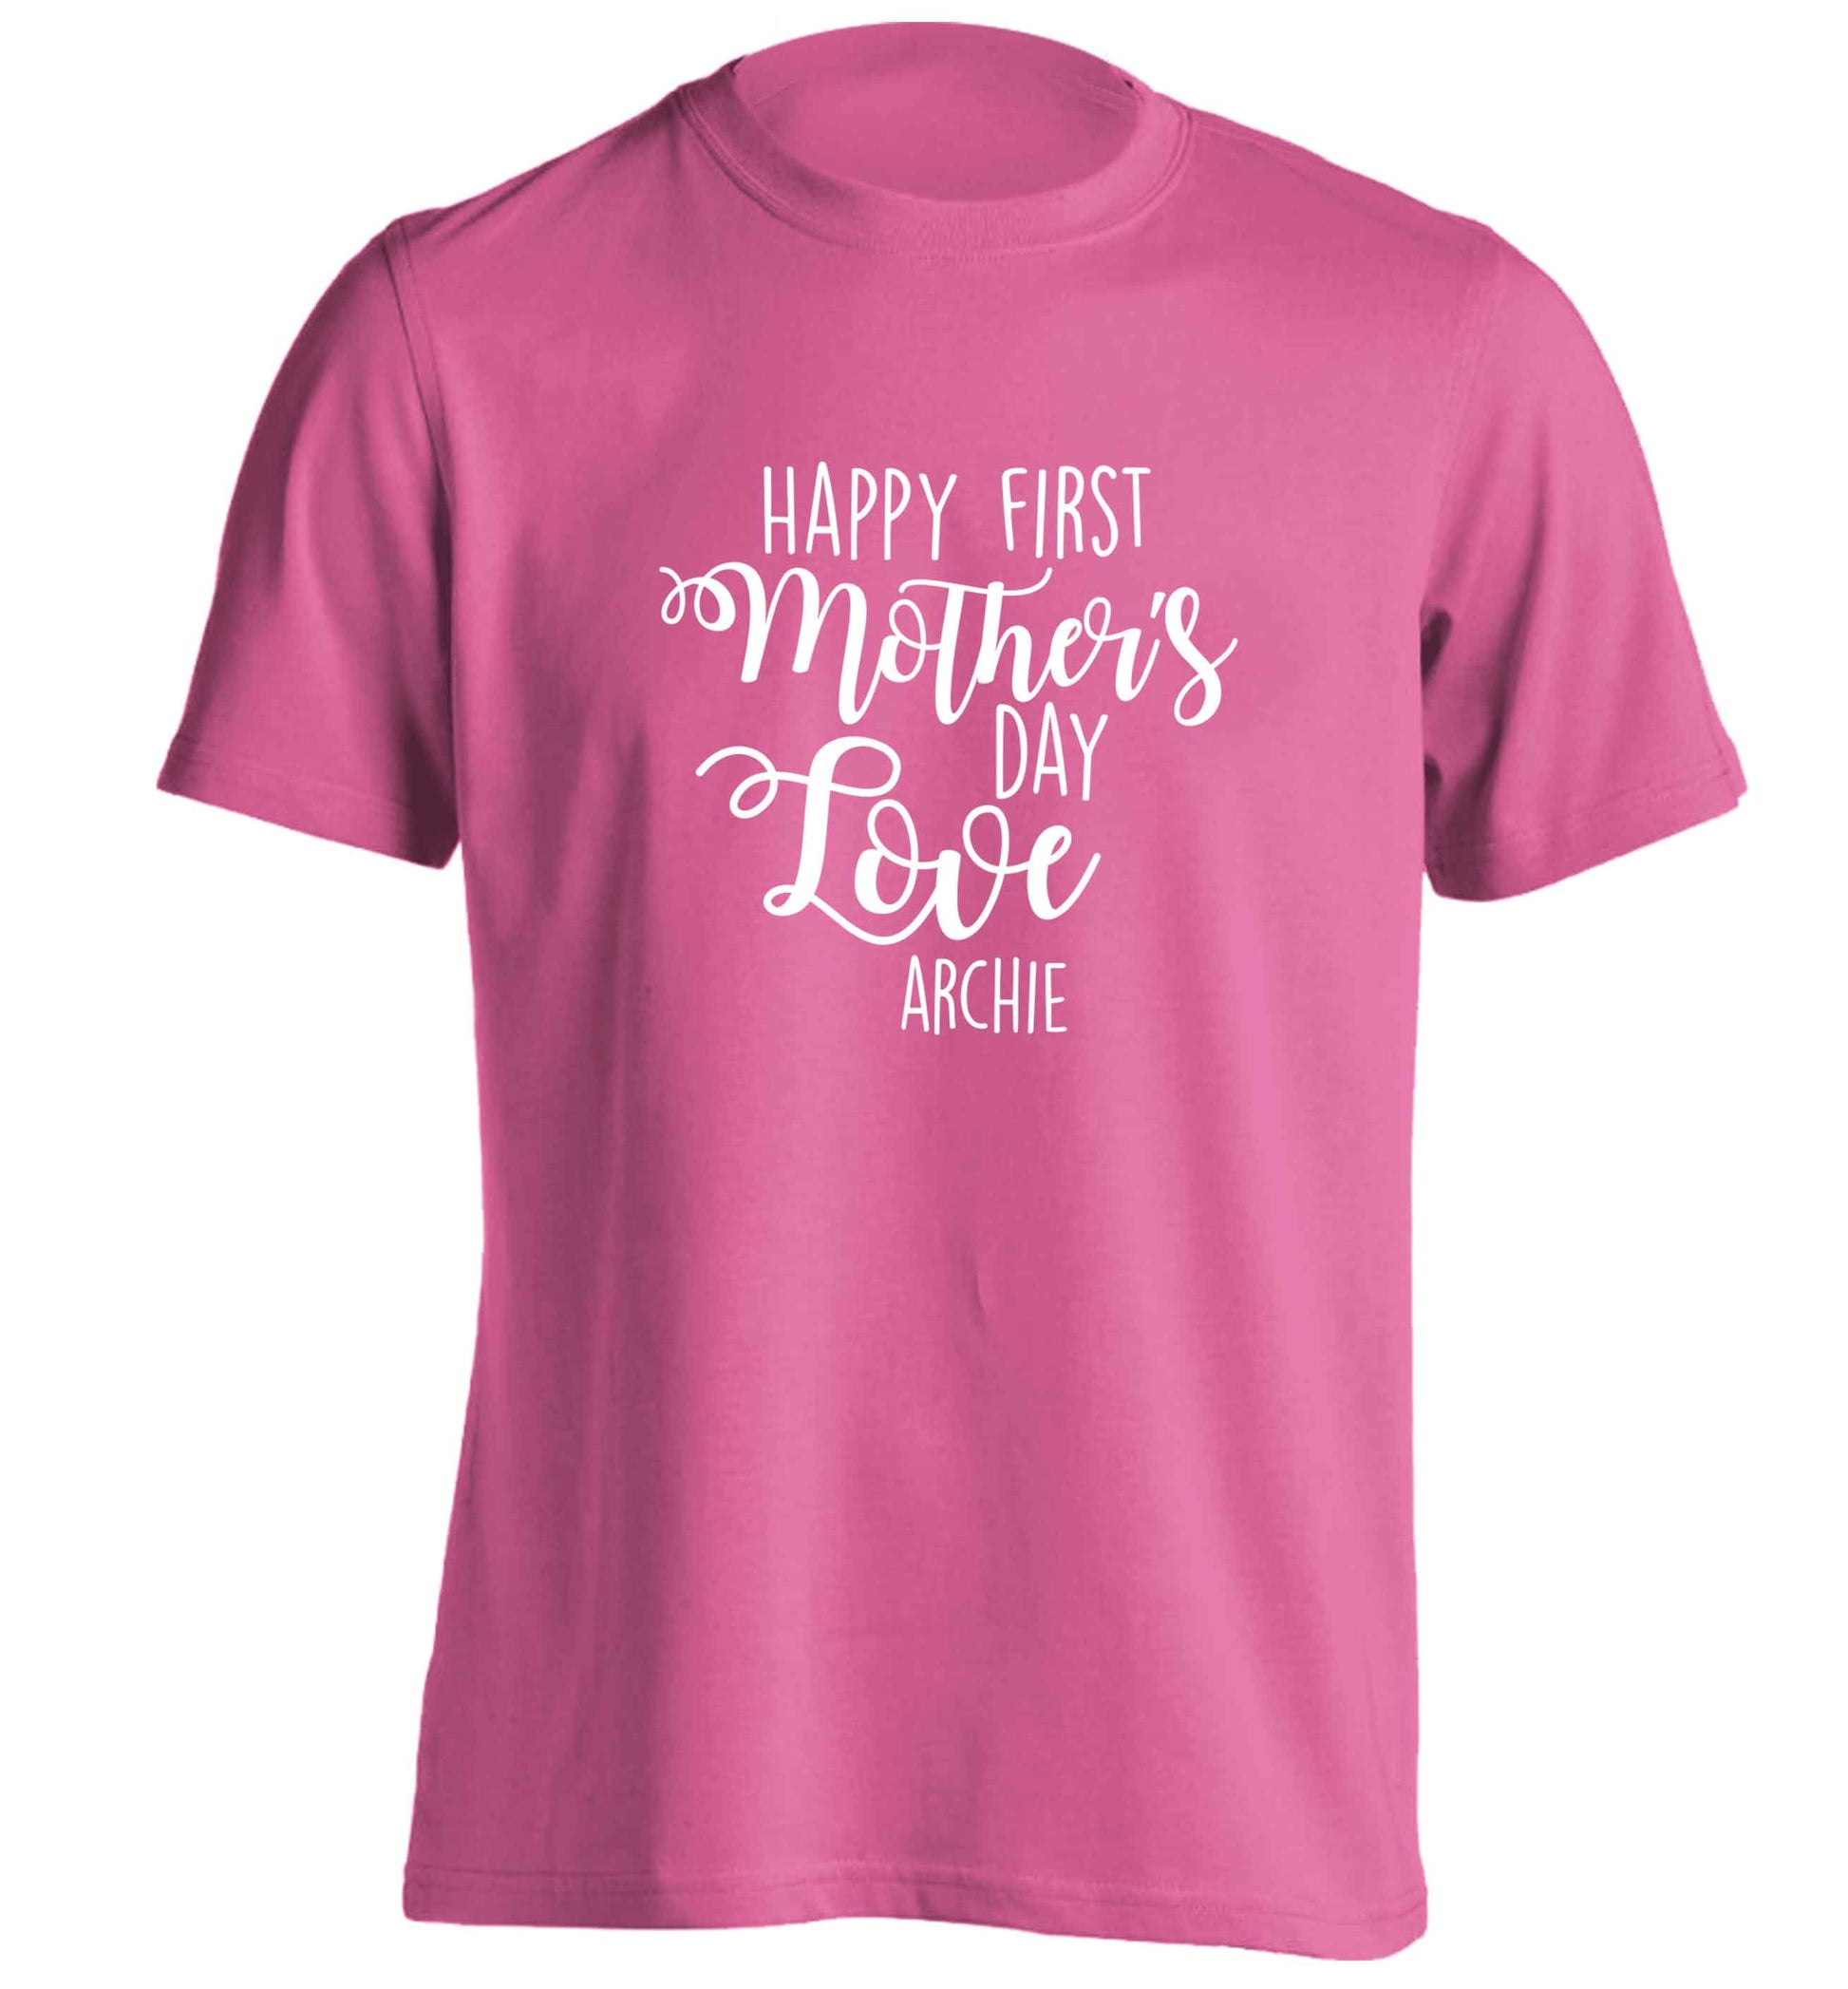 Mummy's first mother's day! adults unisex pink Tshirt 2XL